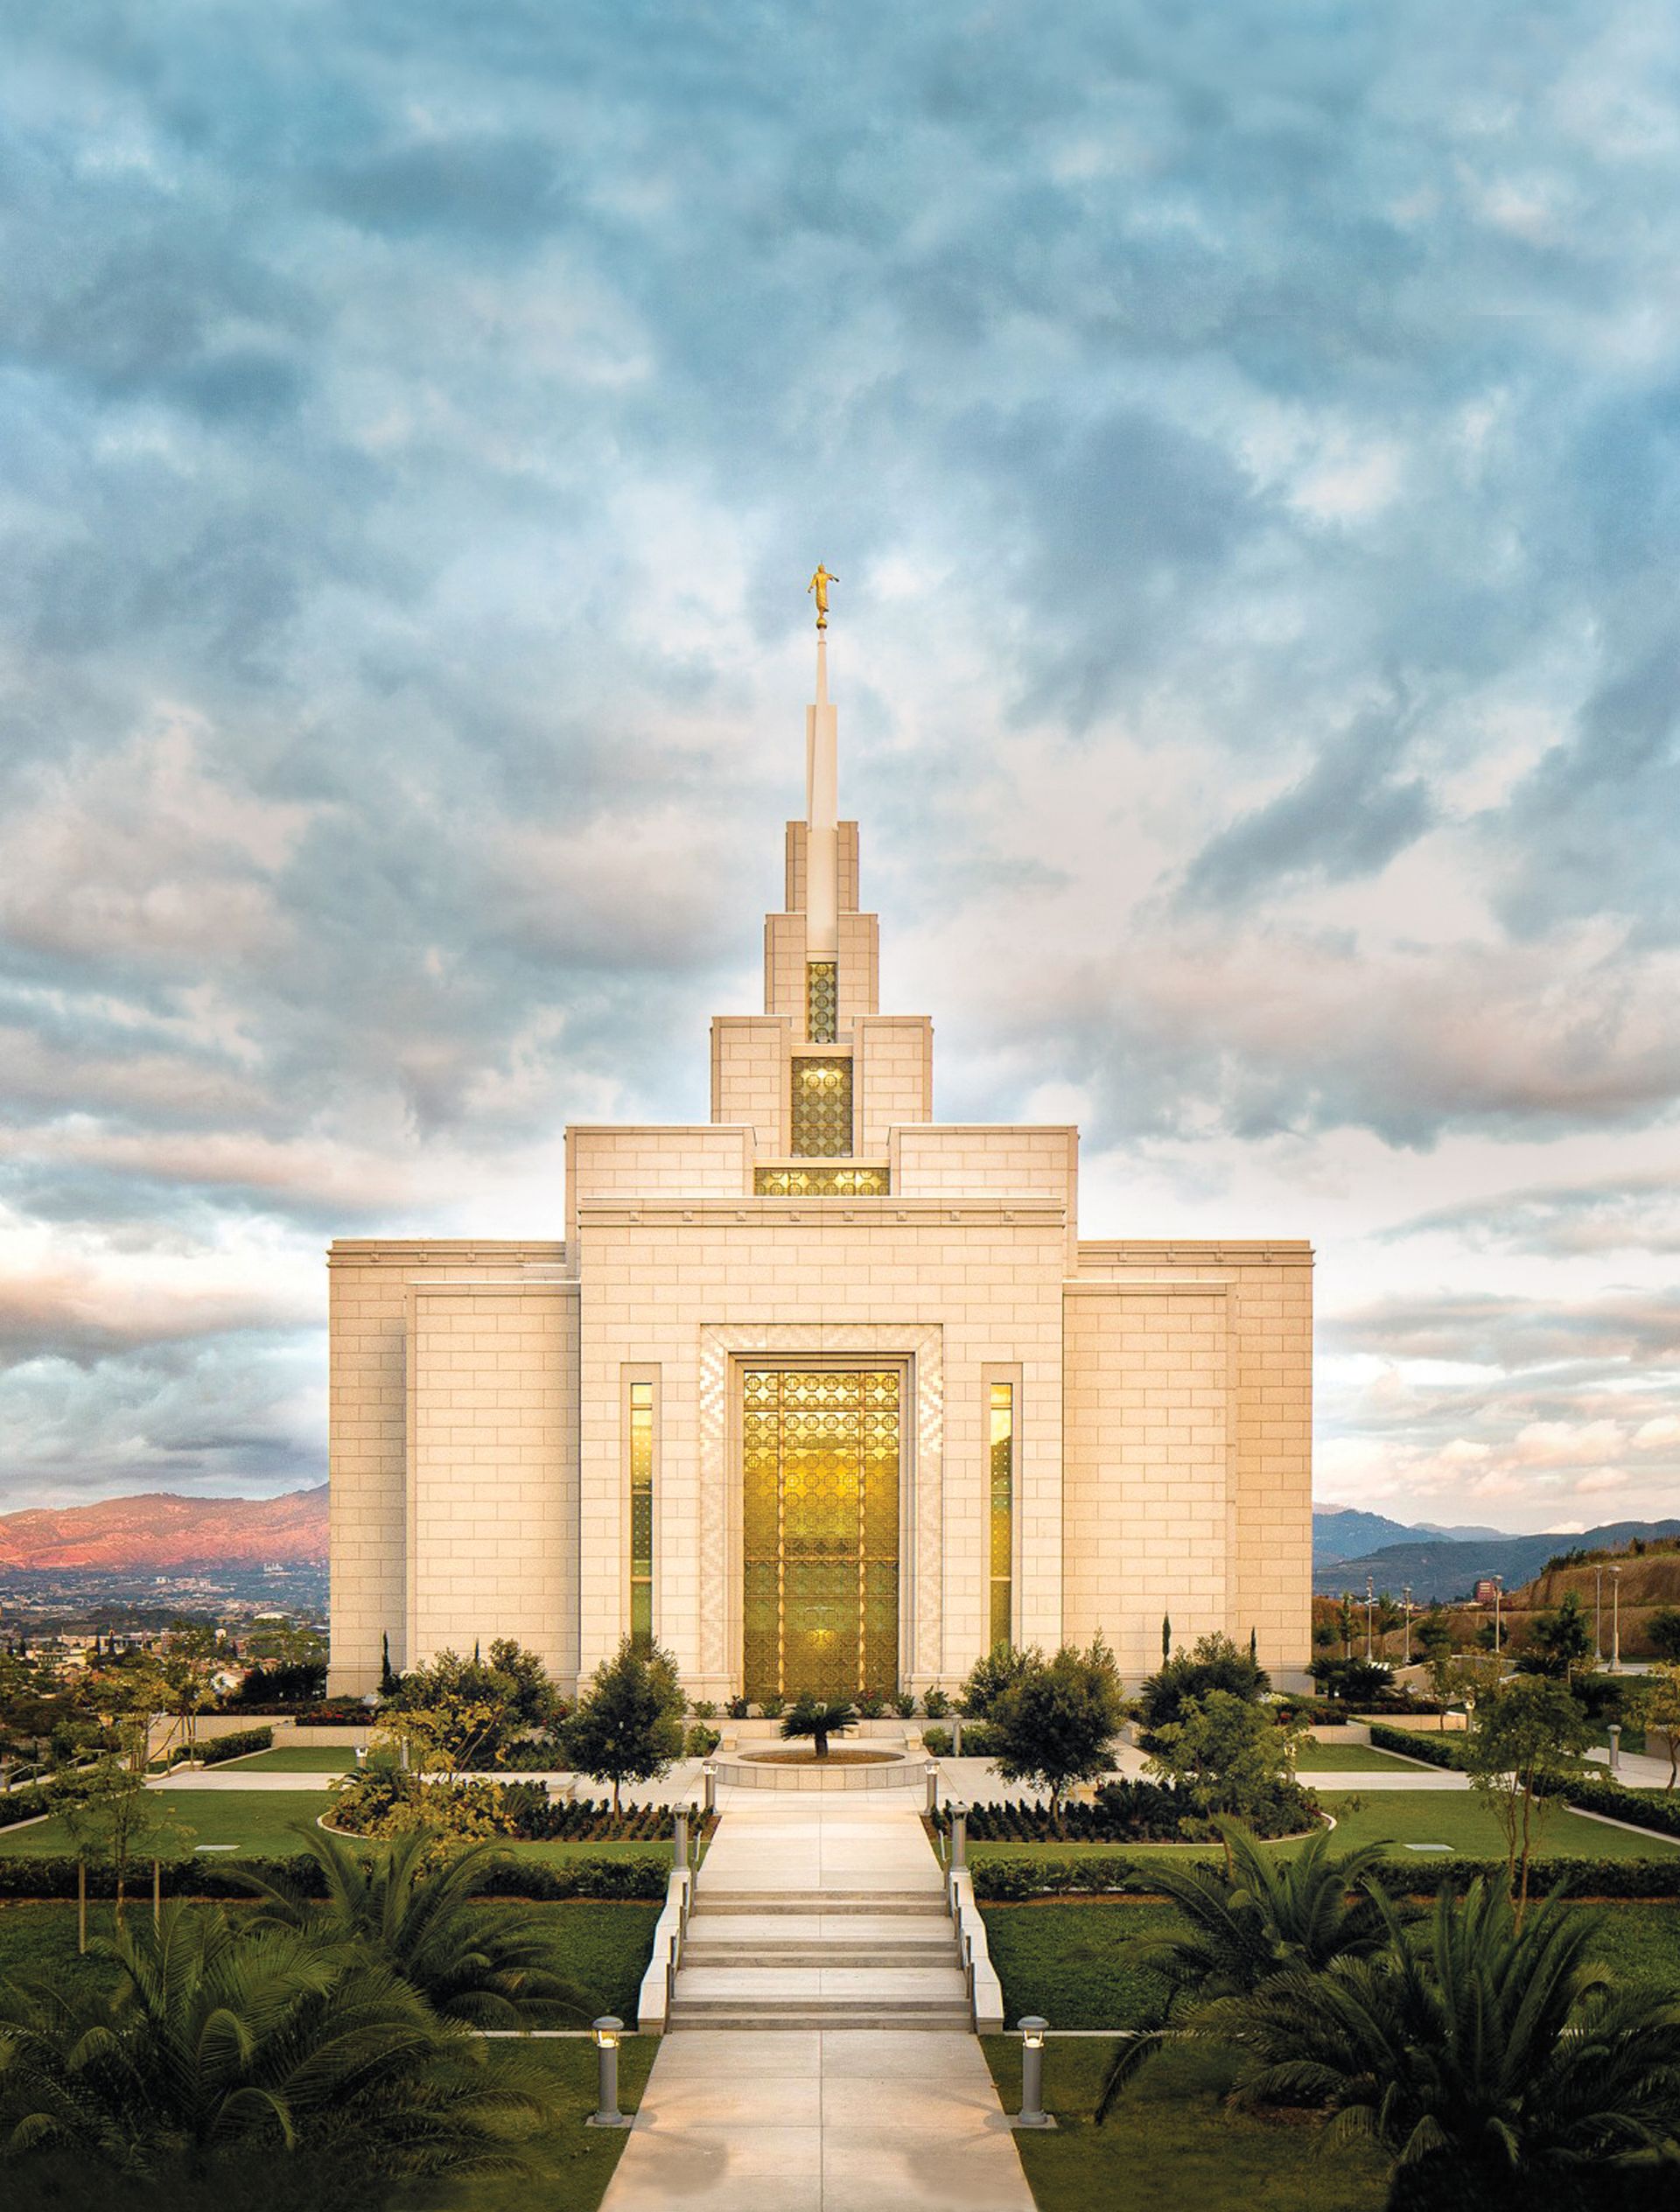 The Tegucigalpa Honduras Temple at sunset, including the entrance and scenery.